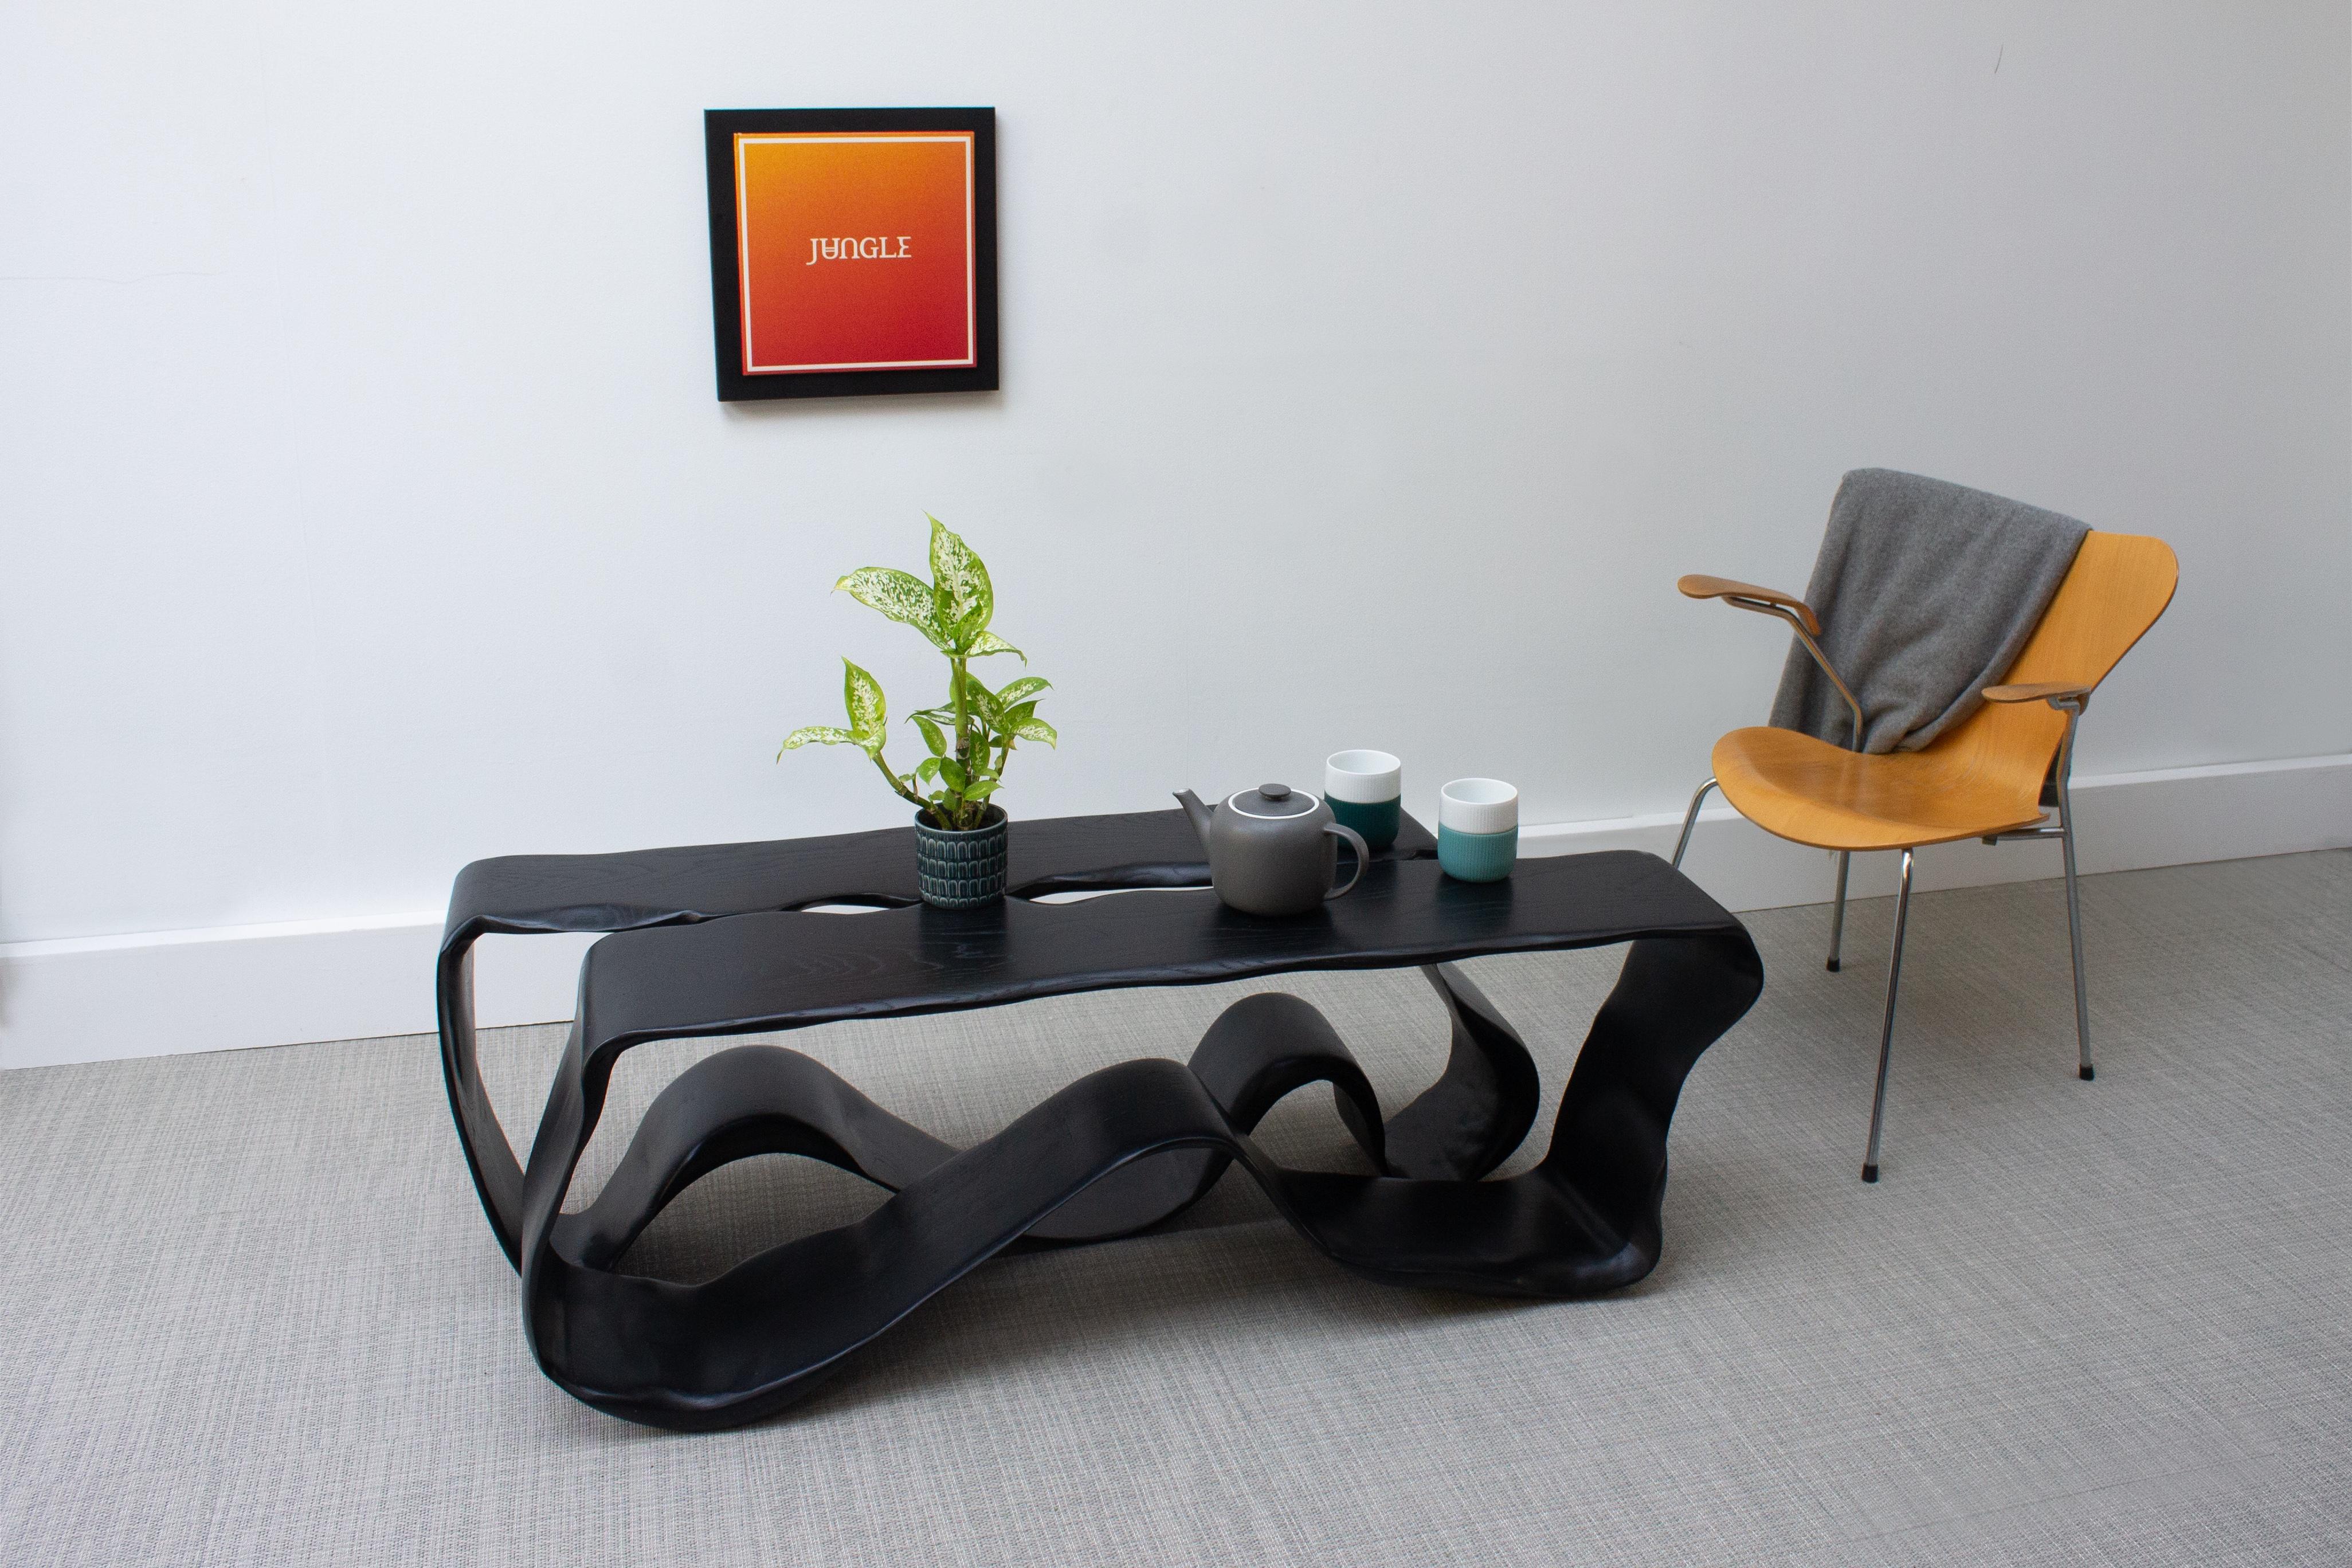 A new addition to our Ribbon Collection. The Ribbon Low Table was created using hundreds of layers of ash veneer carved, shaped and stained to achieve this unique formation.

The sculptural low table evokes a sense of mystery and fluidity. There are